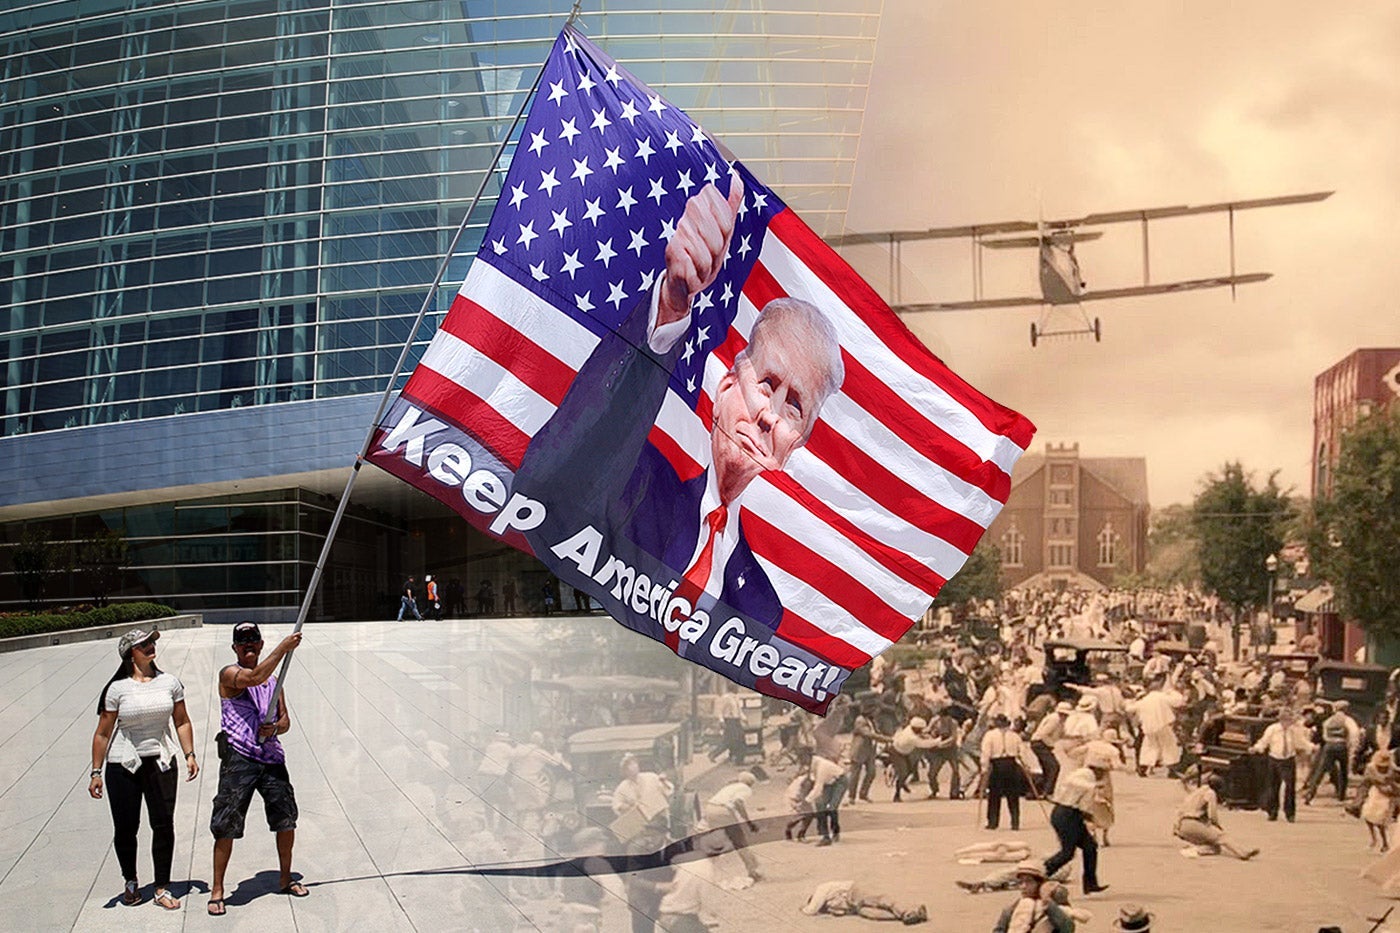 Photo of a Trump supporter waving a giant Keep America Great flag with Trump's face on it, blending into a still of the Tulsa massacre depicted in HBO's Watchmen